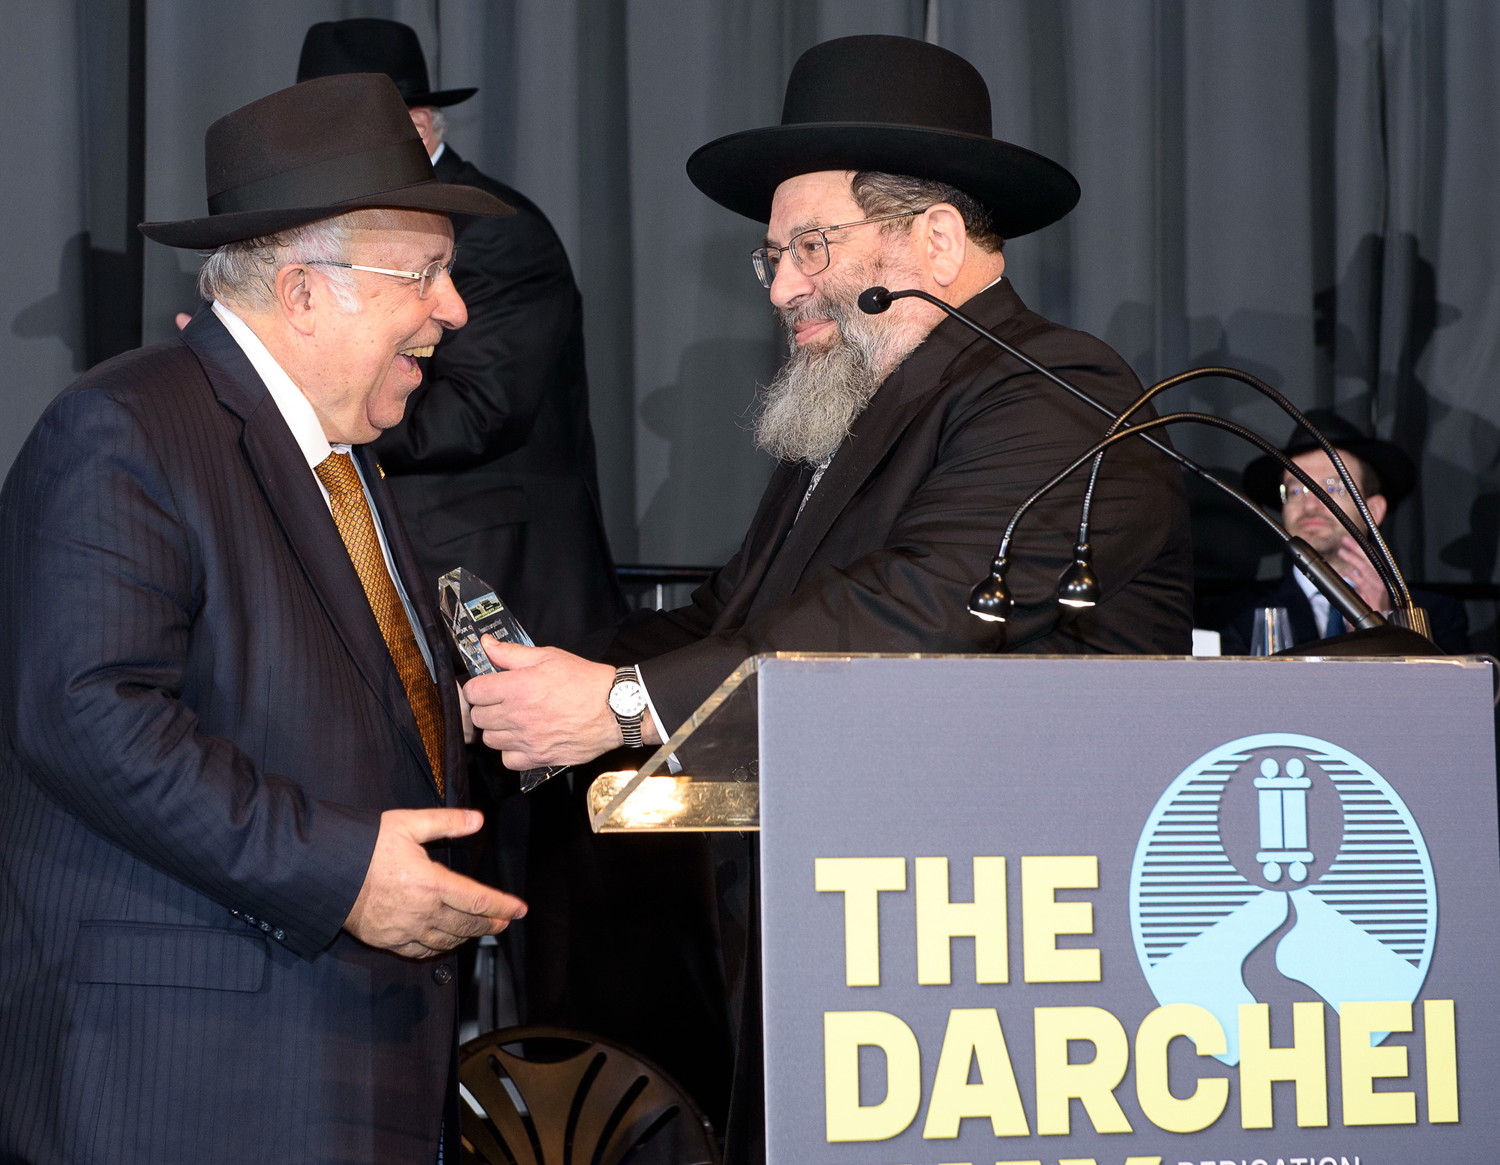 Rabbi Yaakov Bender makes a surprise presentation to Rabbi Lloyd Keilson, co-chairman of the YDT board, in recognition of his tireless efforts on the school's mortgage refinance.